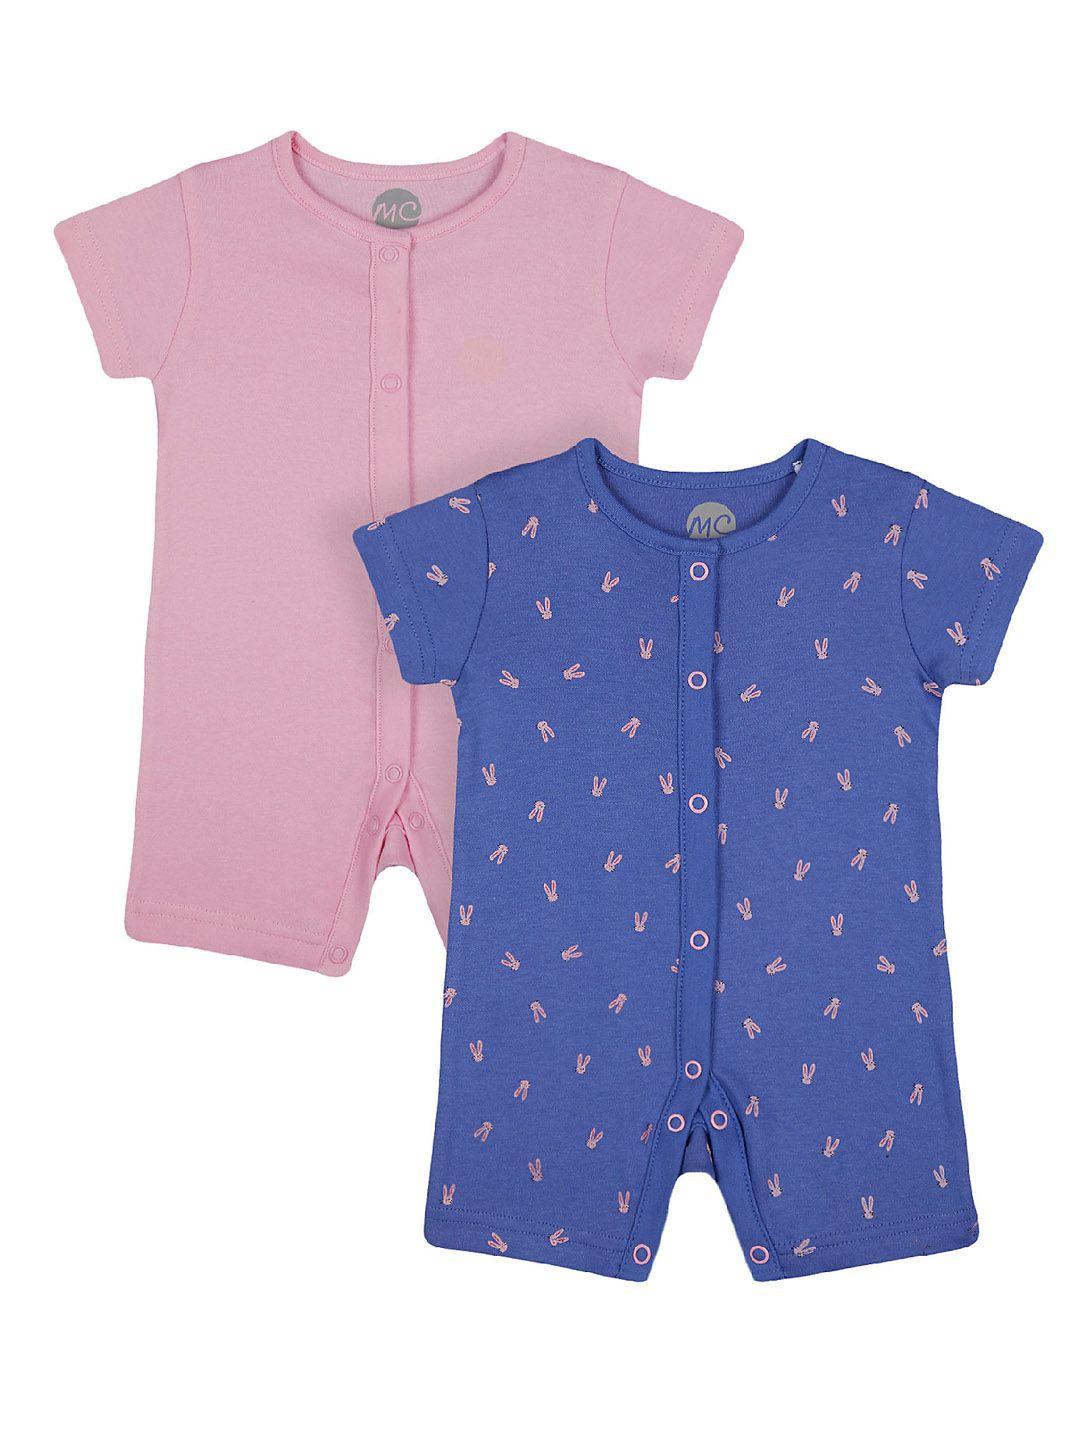 mothercare girls set of 2 rompers